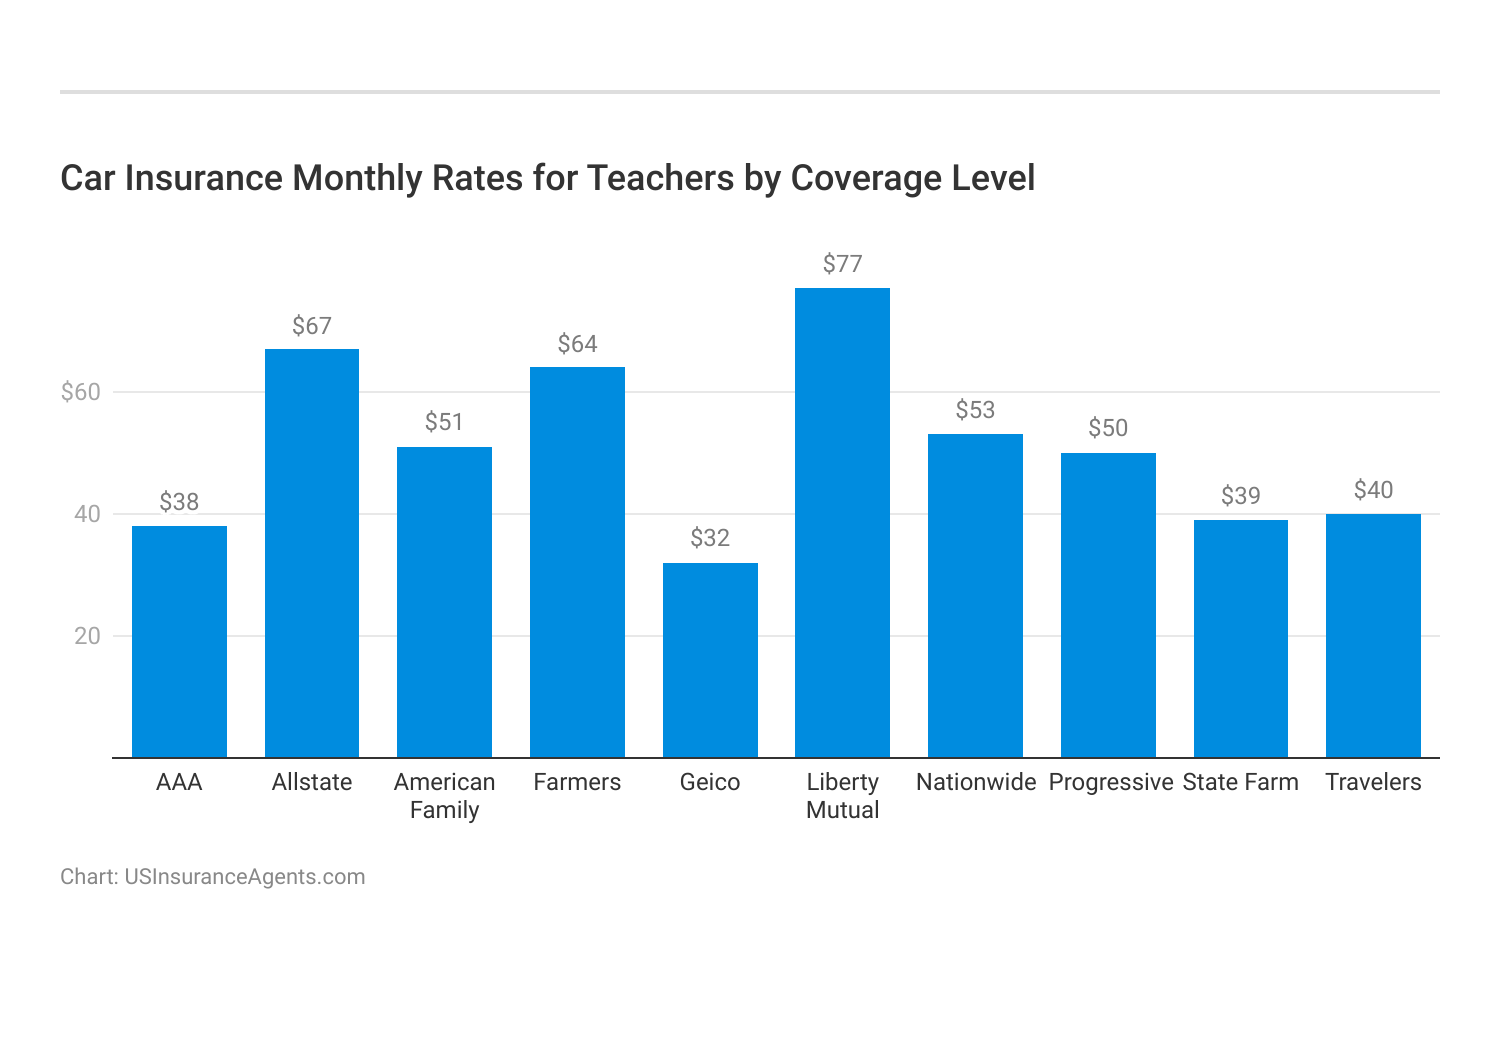 <h3>Car Insurance Monthly Rates for Teachers by Coverage Level</h3>